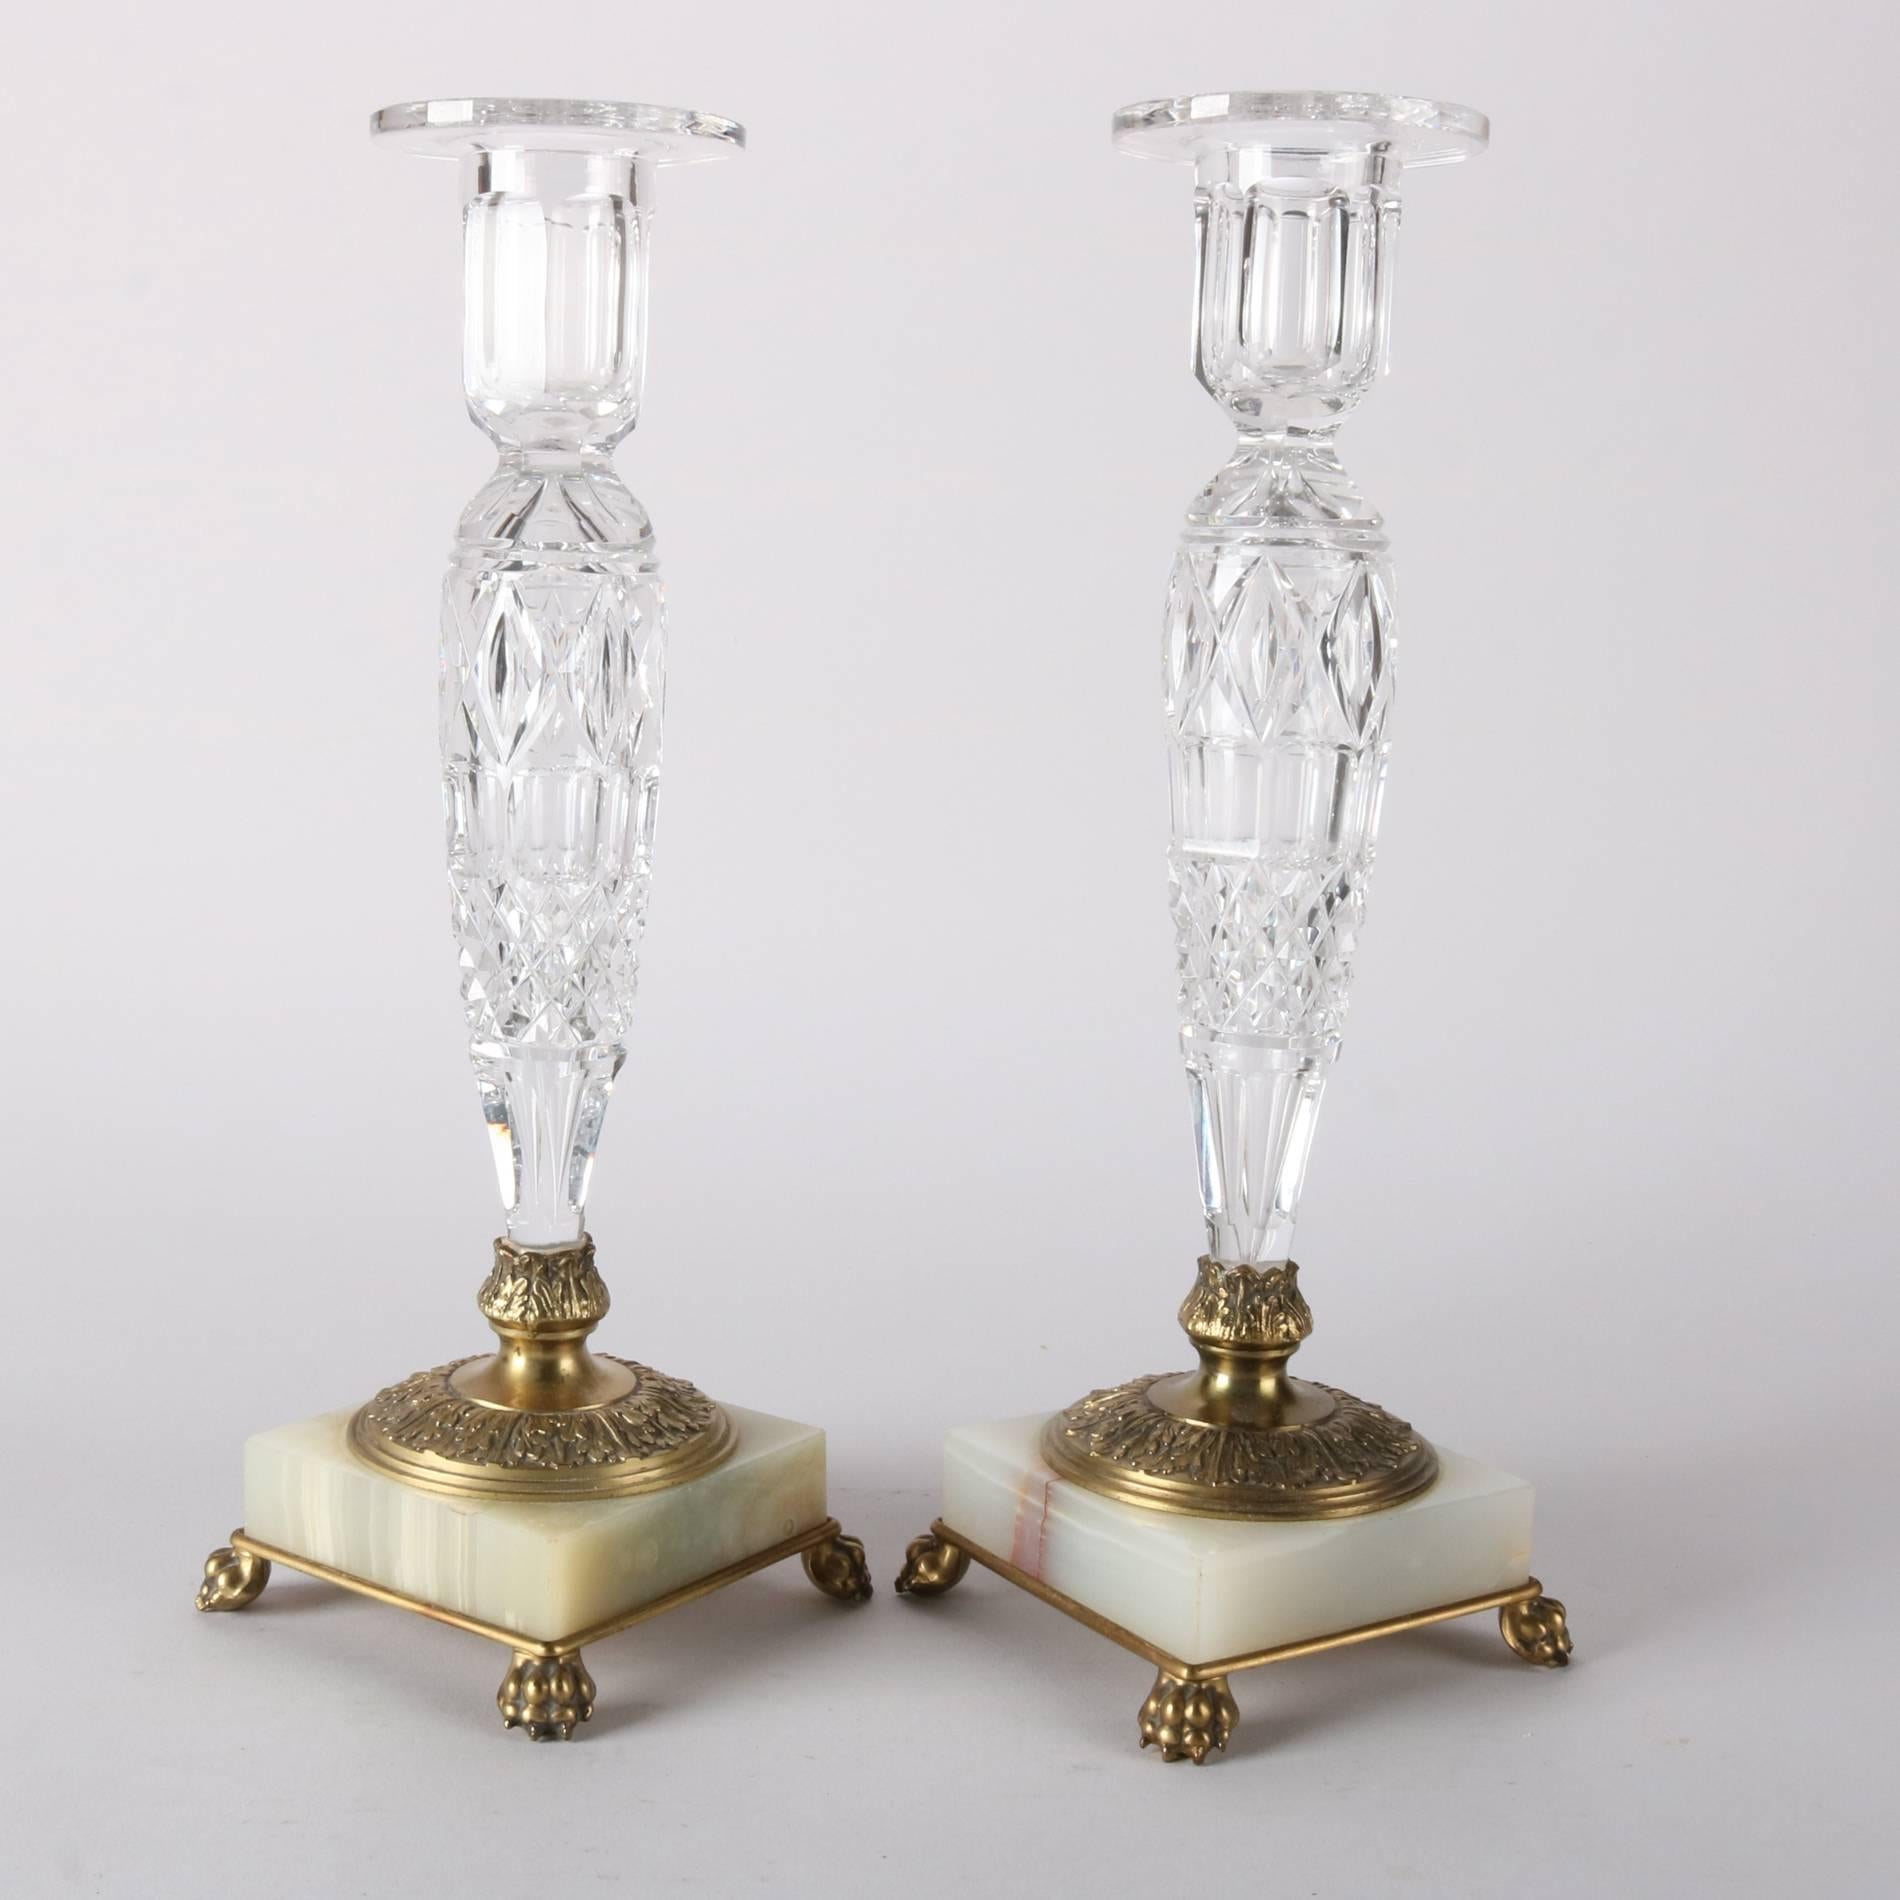 Pair of antique candle sticks by Pairpoint feature cut crystal shafts and receivers mounted on onyx bases with embossed brass attachments including paw feet, on base maker mark and C6184, 20th century

Measure - 12" H x 4.5" W x